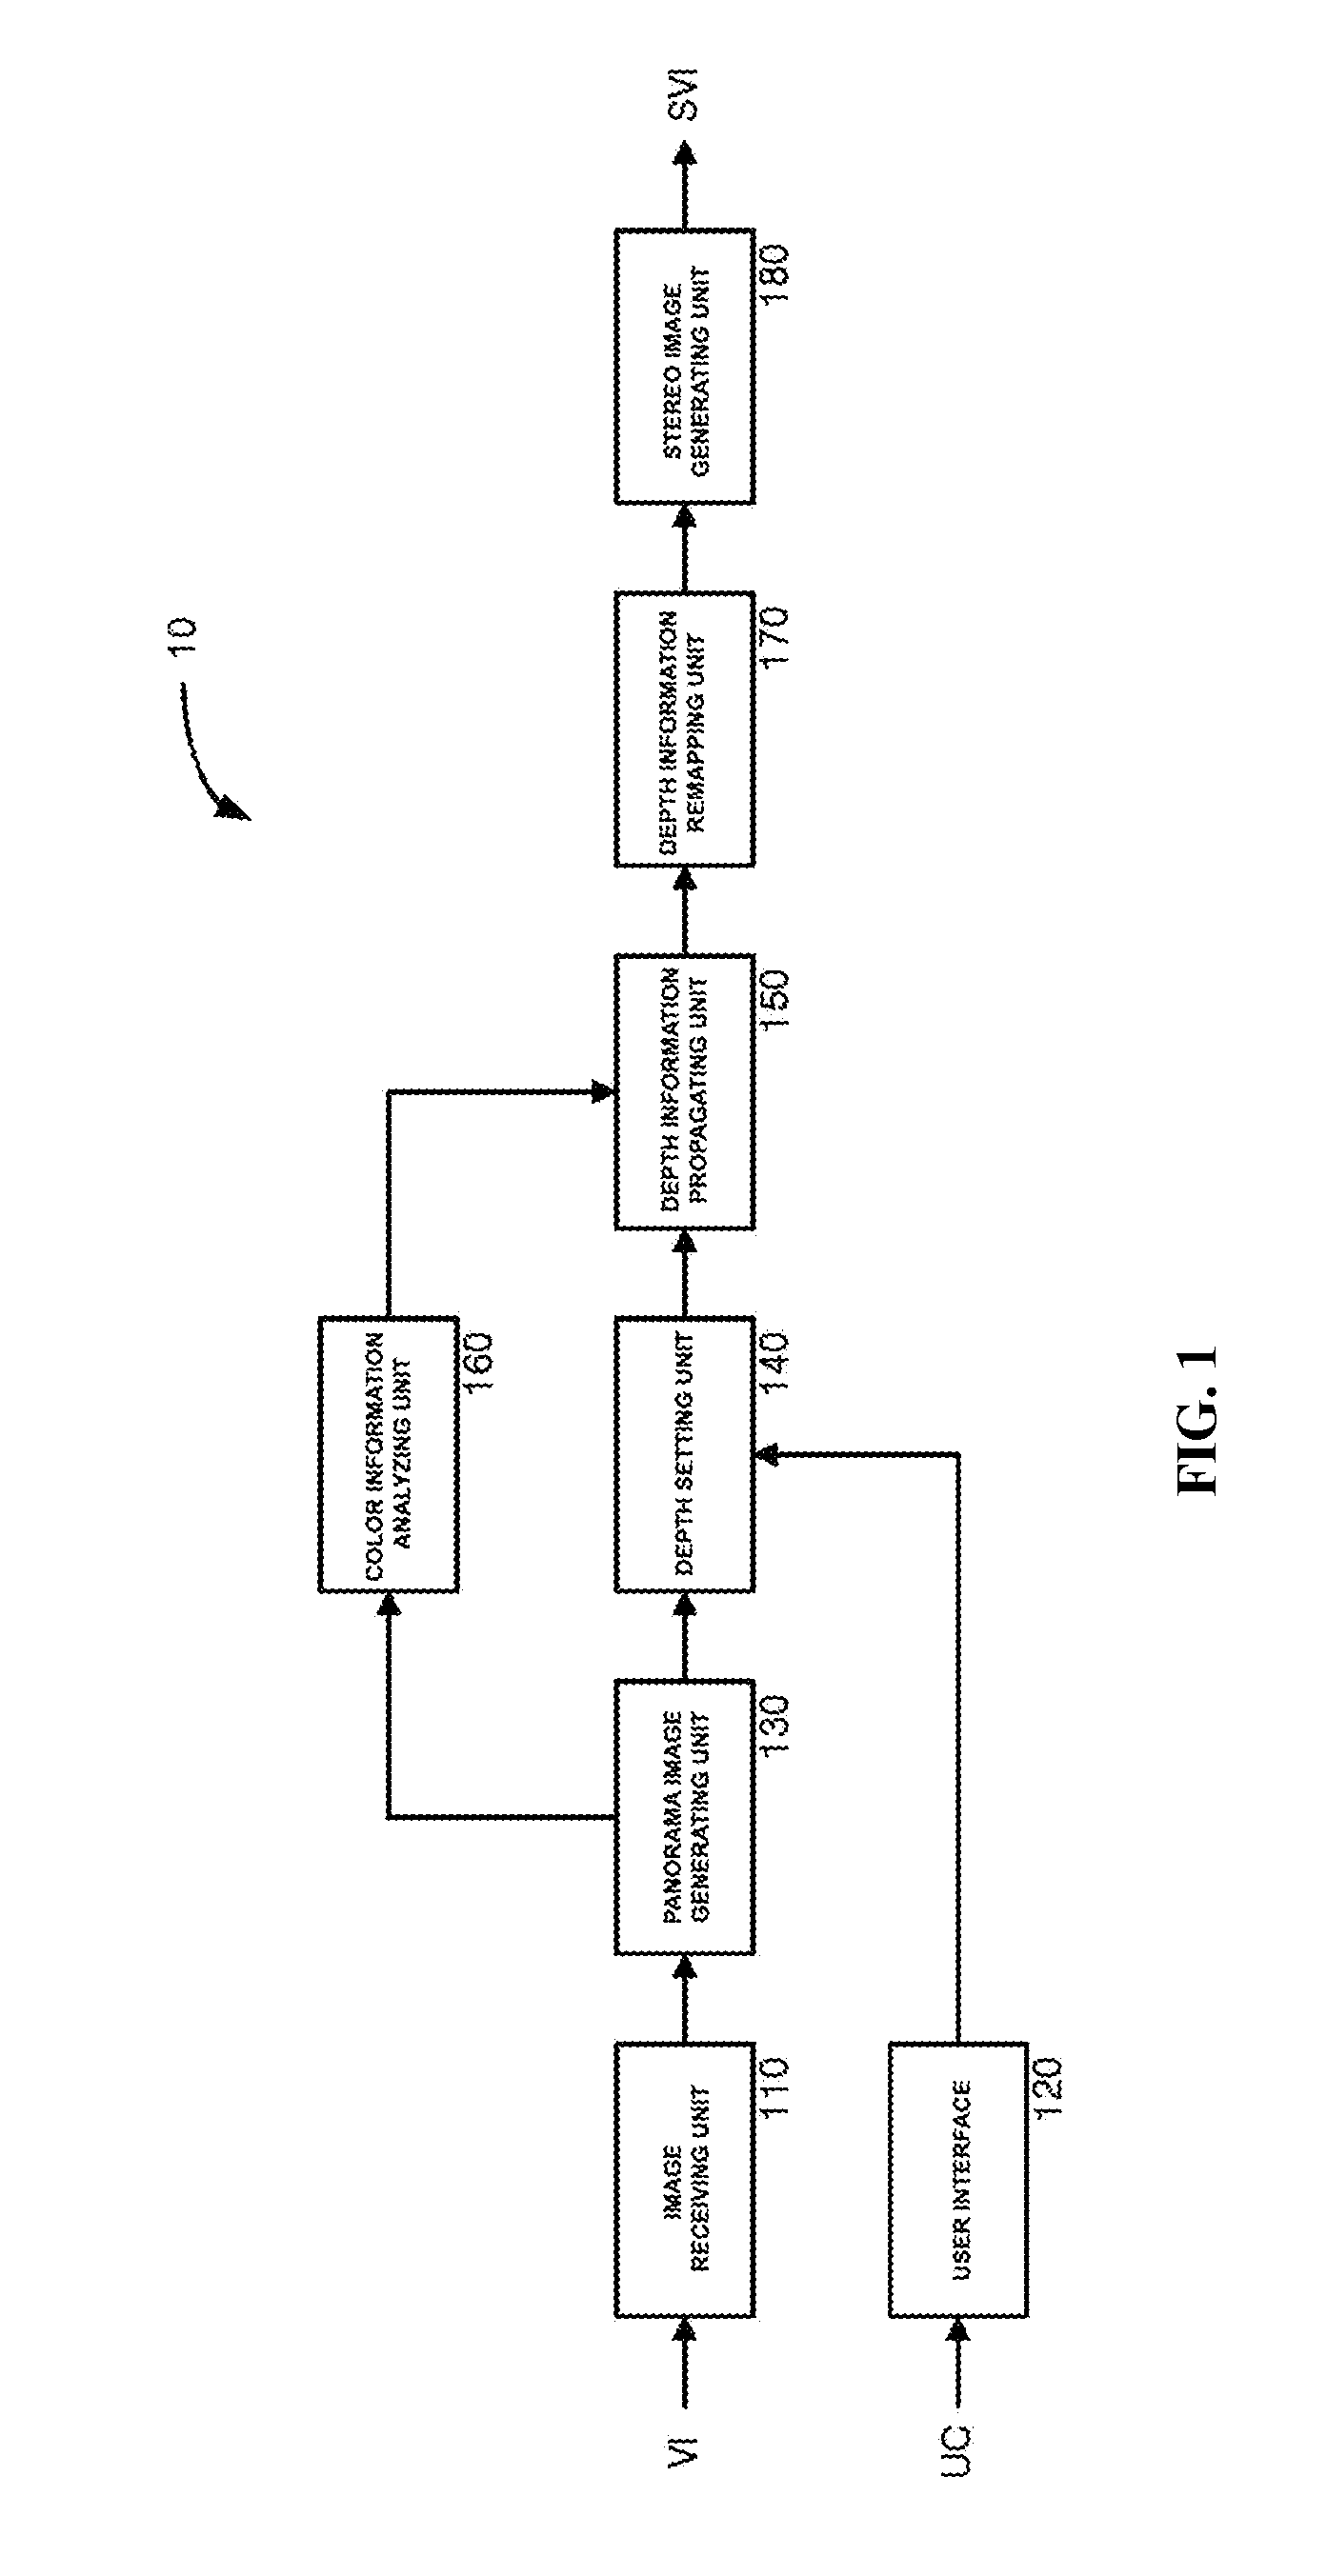 Method and apparatus for 2d to 3D conversion using panorama image